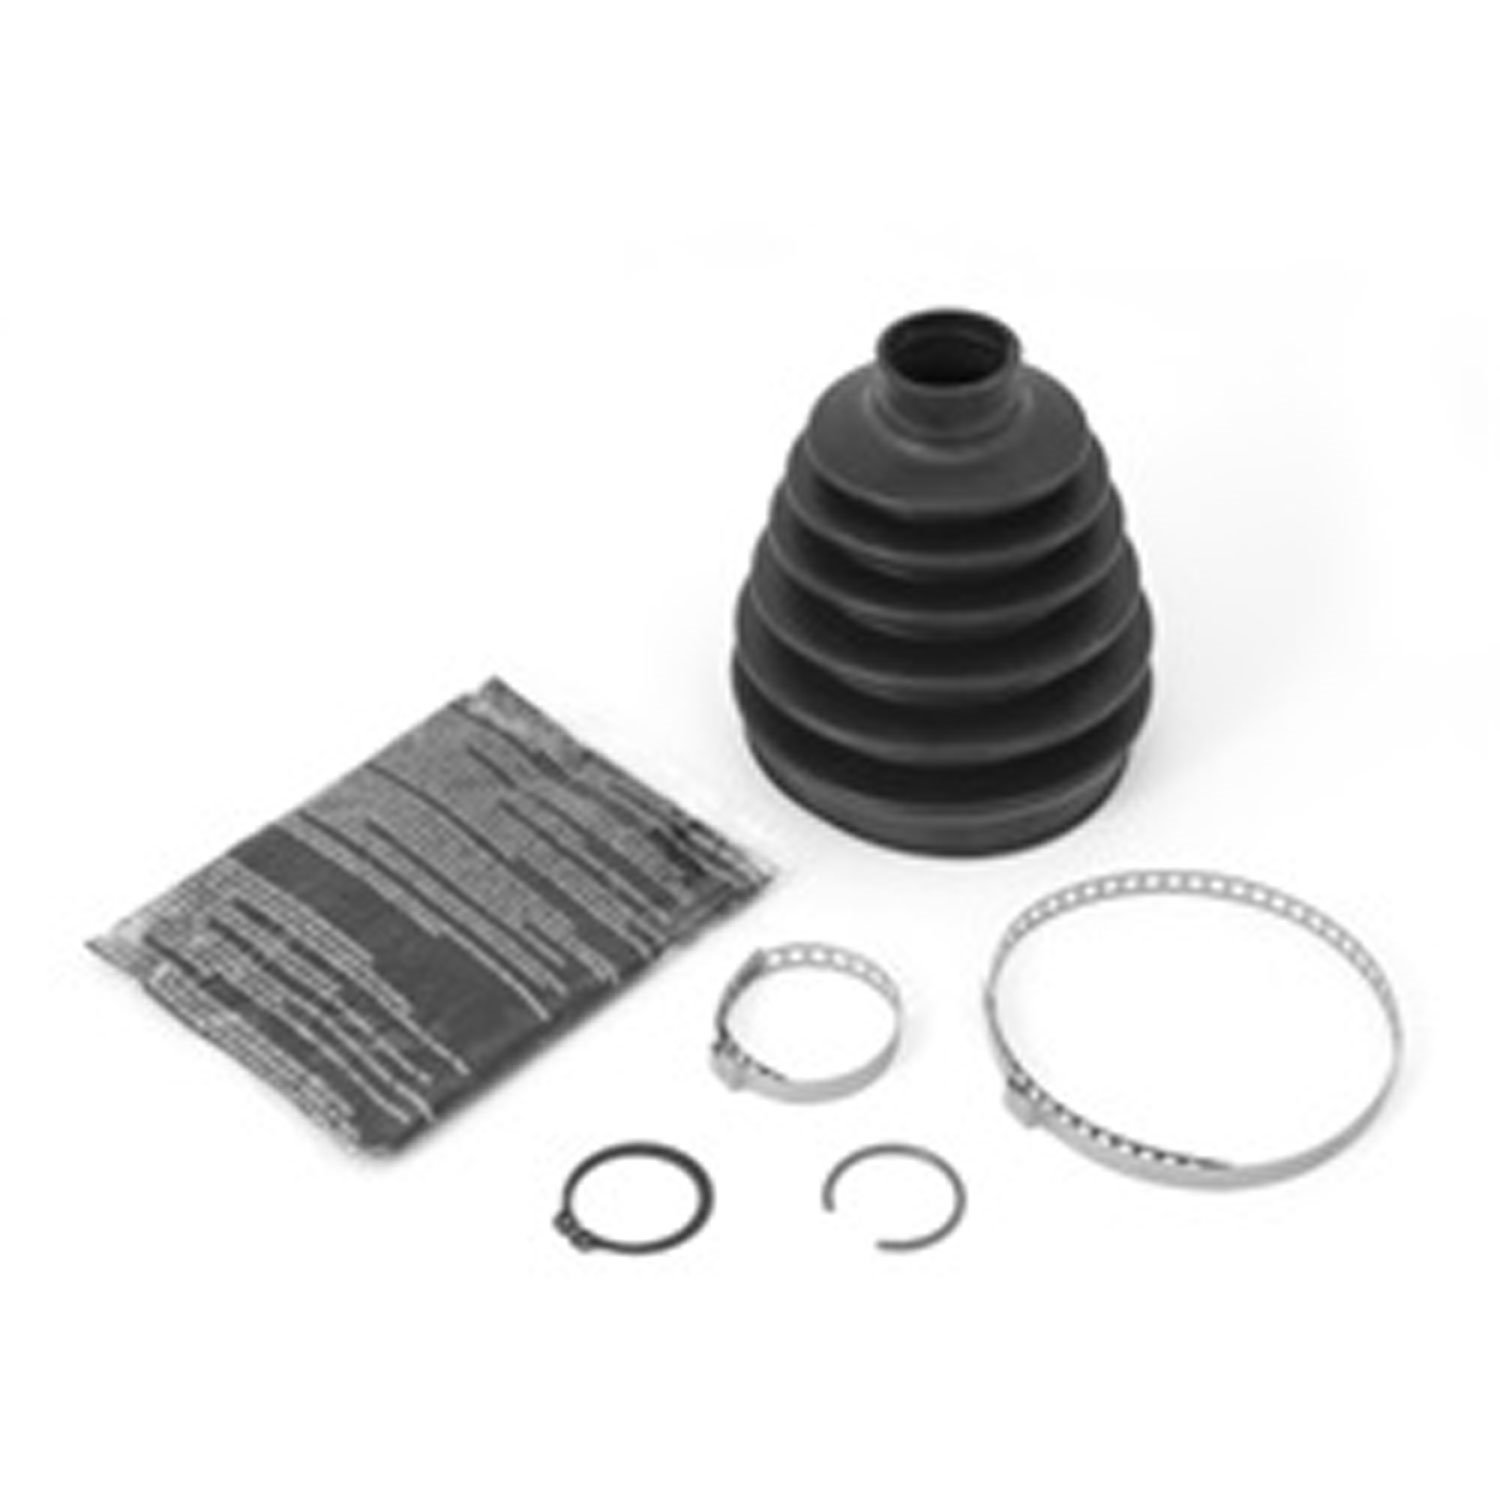 This front outer axle CV boot kit for